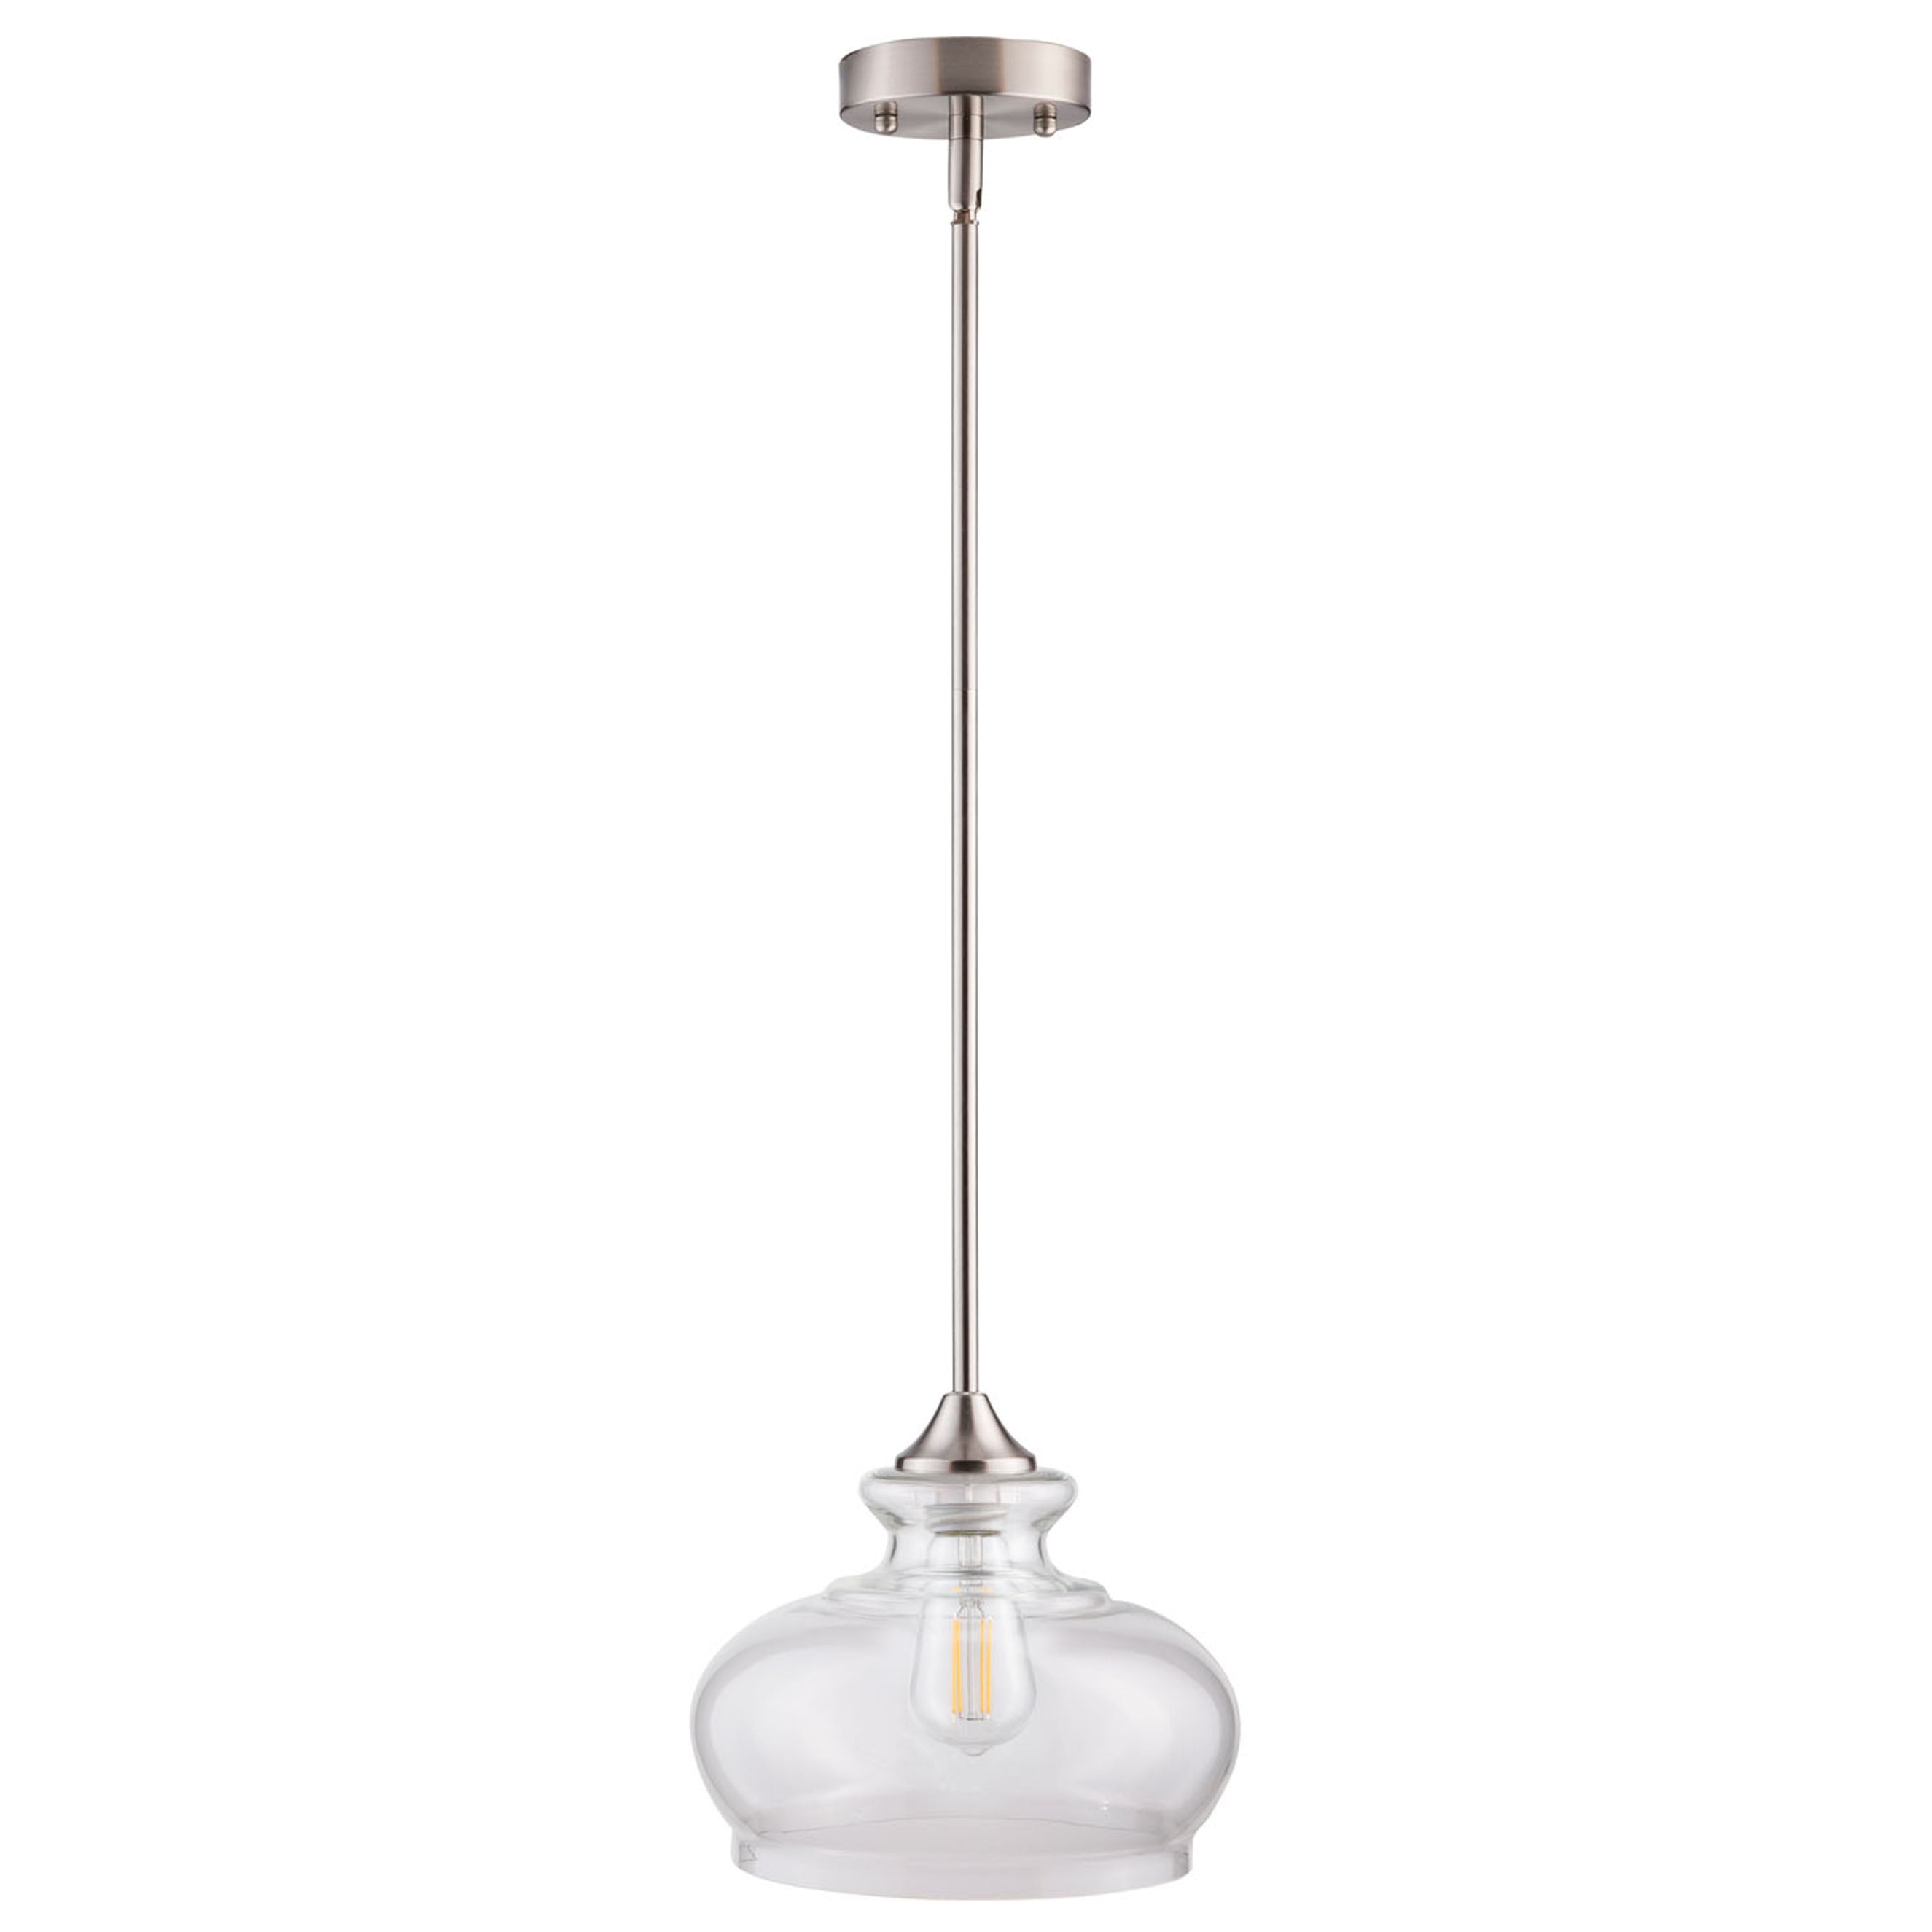 Light, Residential Lighting Ovale Modern Affordable Ariella | and | Lighting bulb included Pendant Linea LED